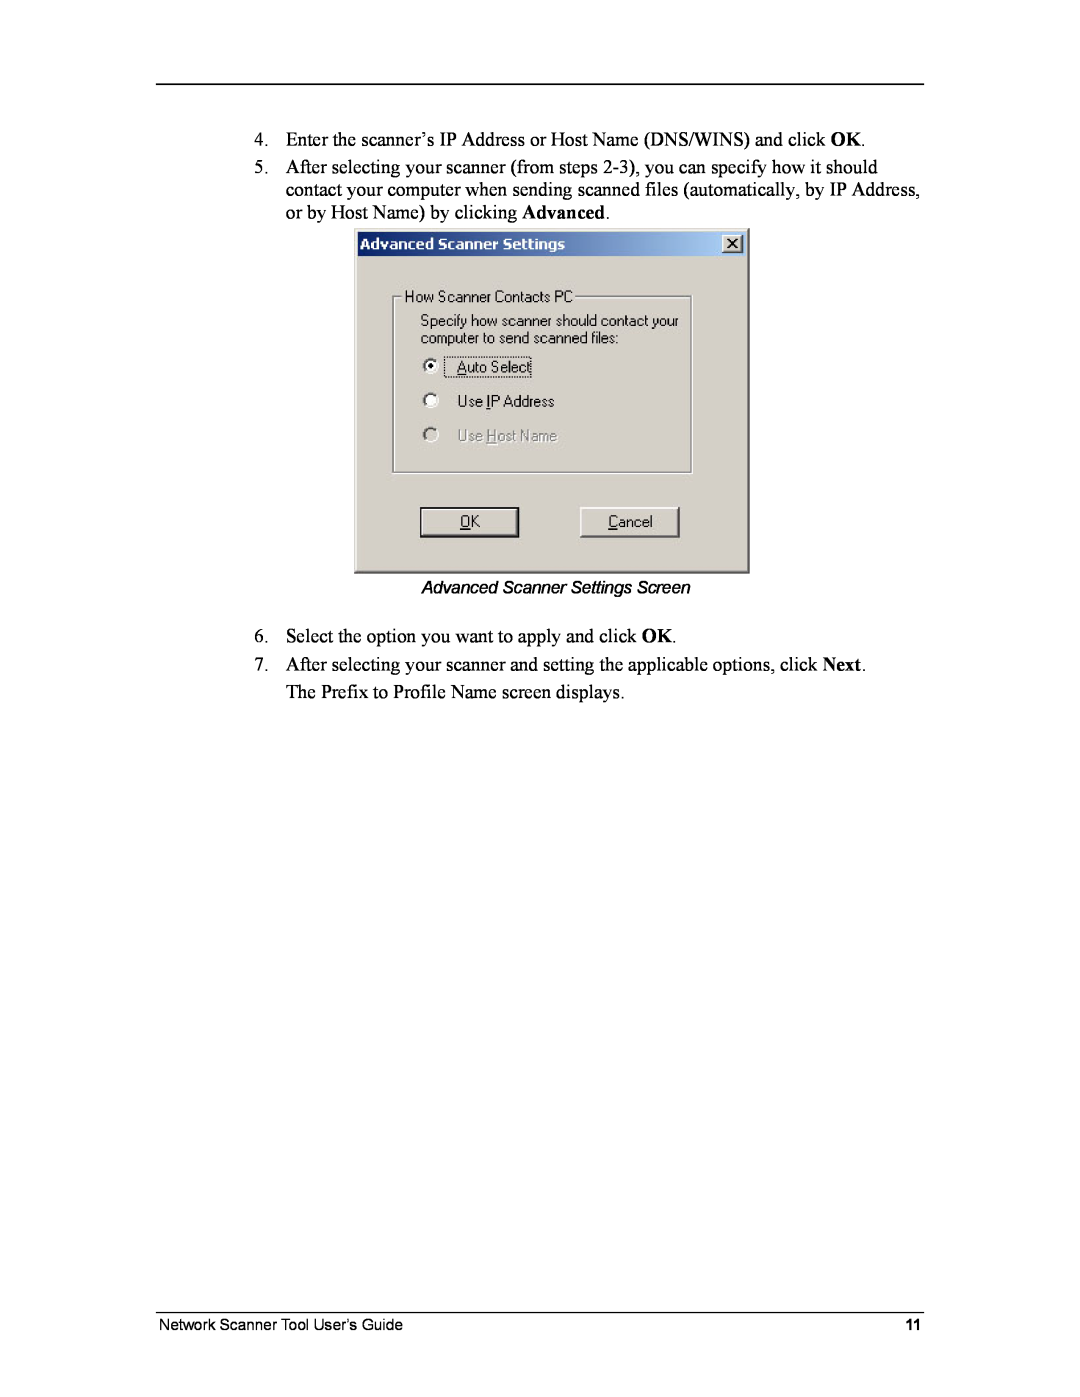 Sharp R3.1 manual Enter the scanner’s IP Address or Host Name DNS/WINS and click OK 